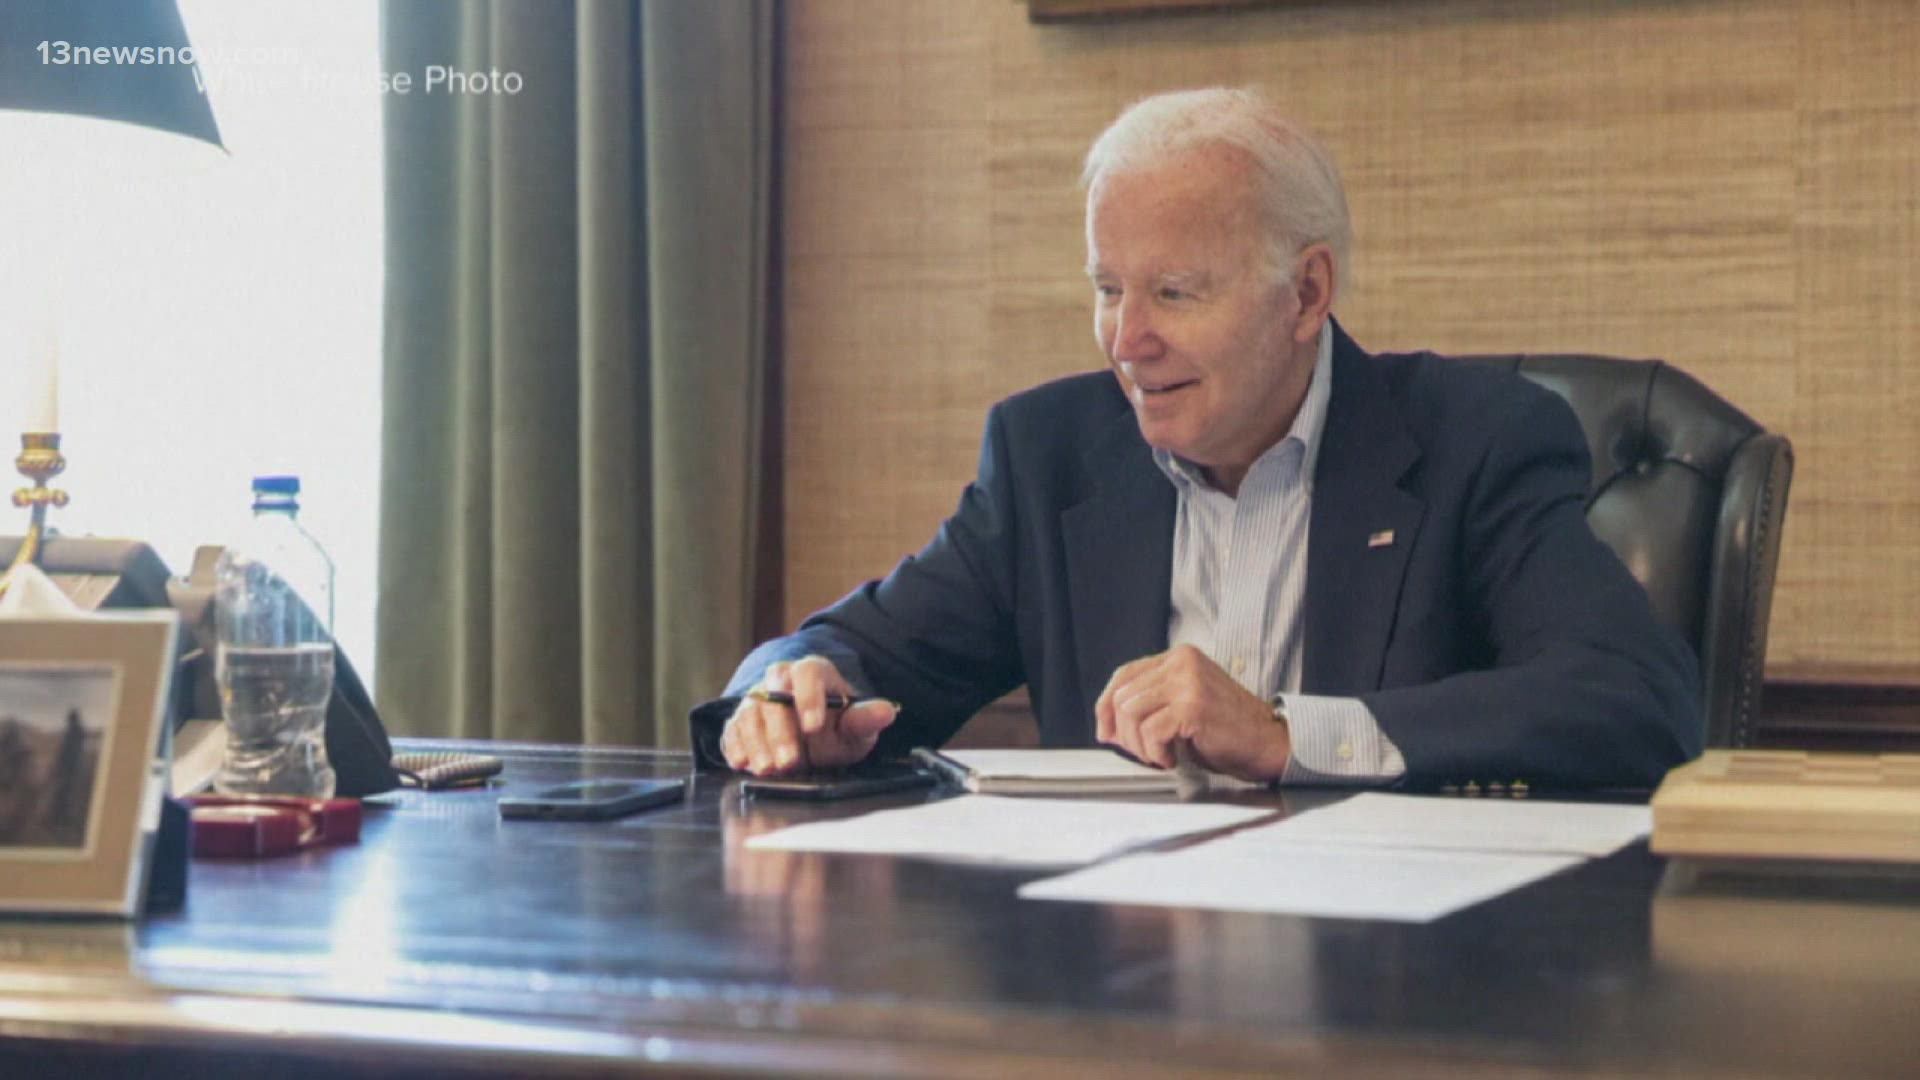 President Biden is isolating for a second straight day after he tested positive for COVID-19.